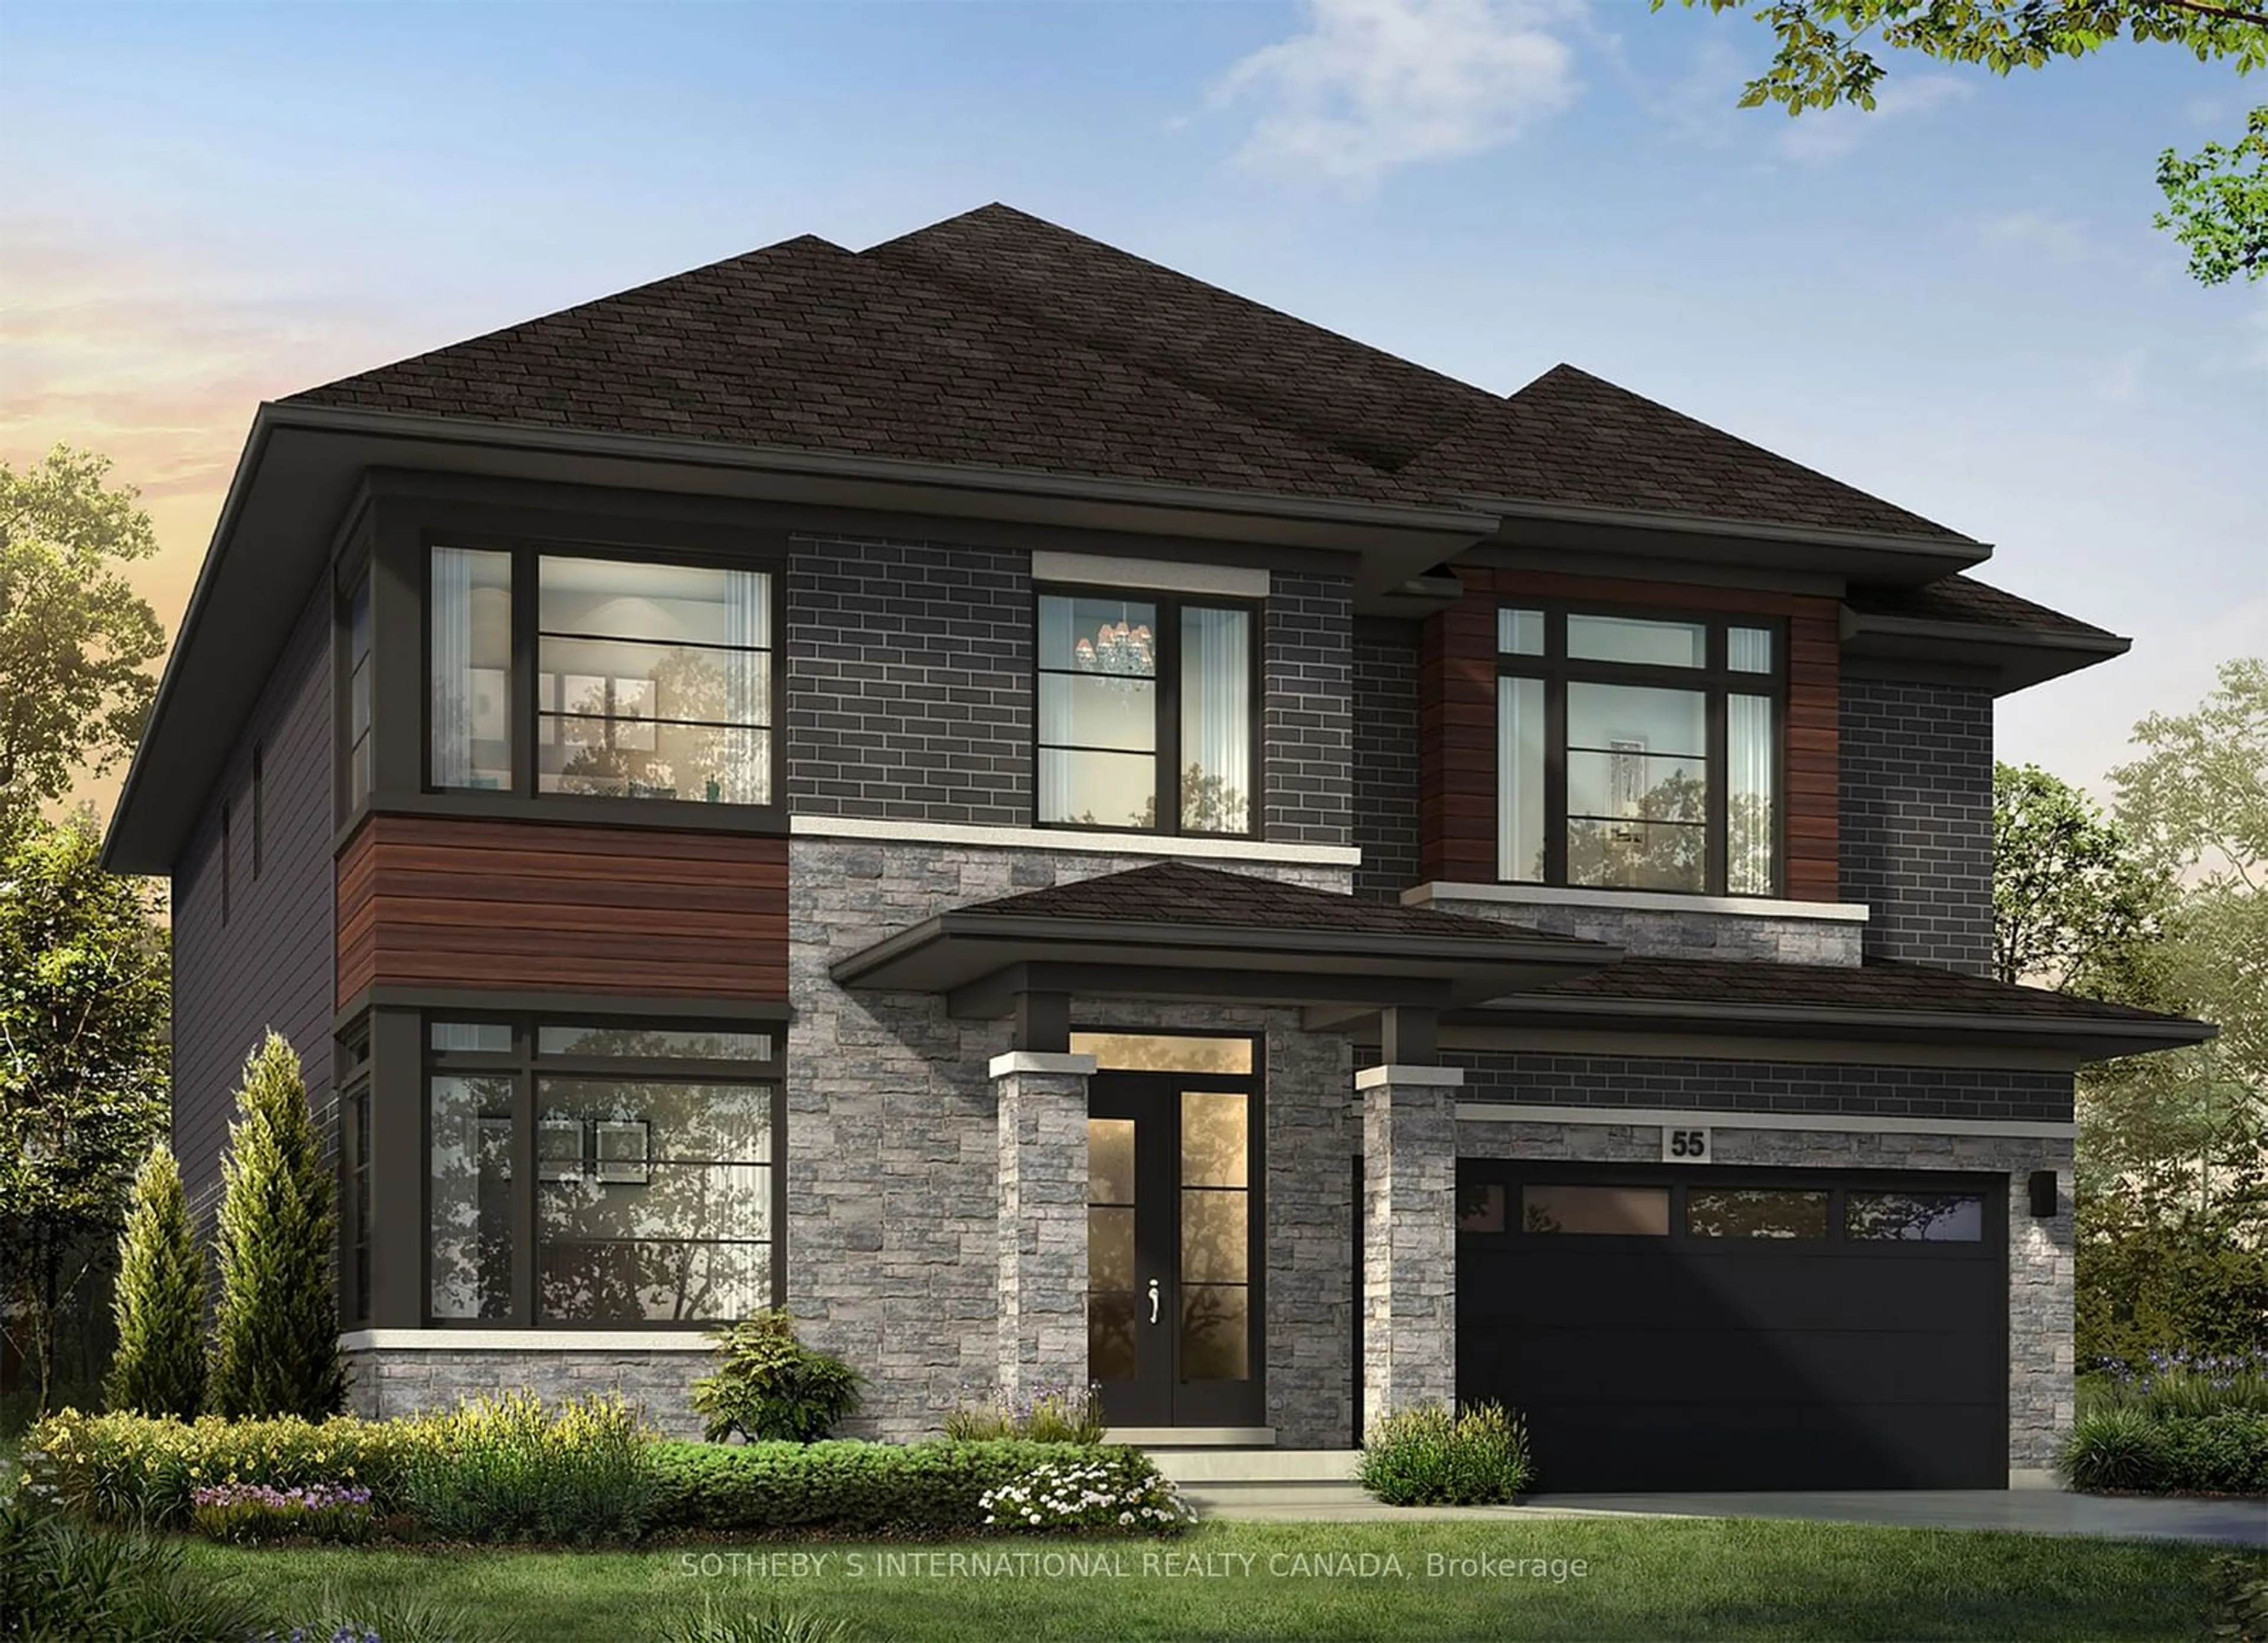 Home with brick exterior material for Lot 141 Ralph Newbrooke Circ, Brant Ontario N3L 1G9